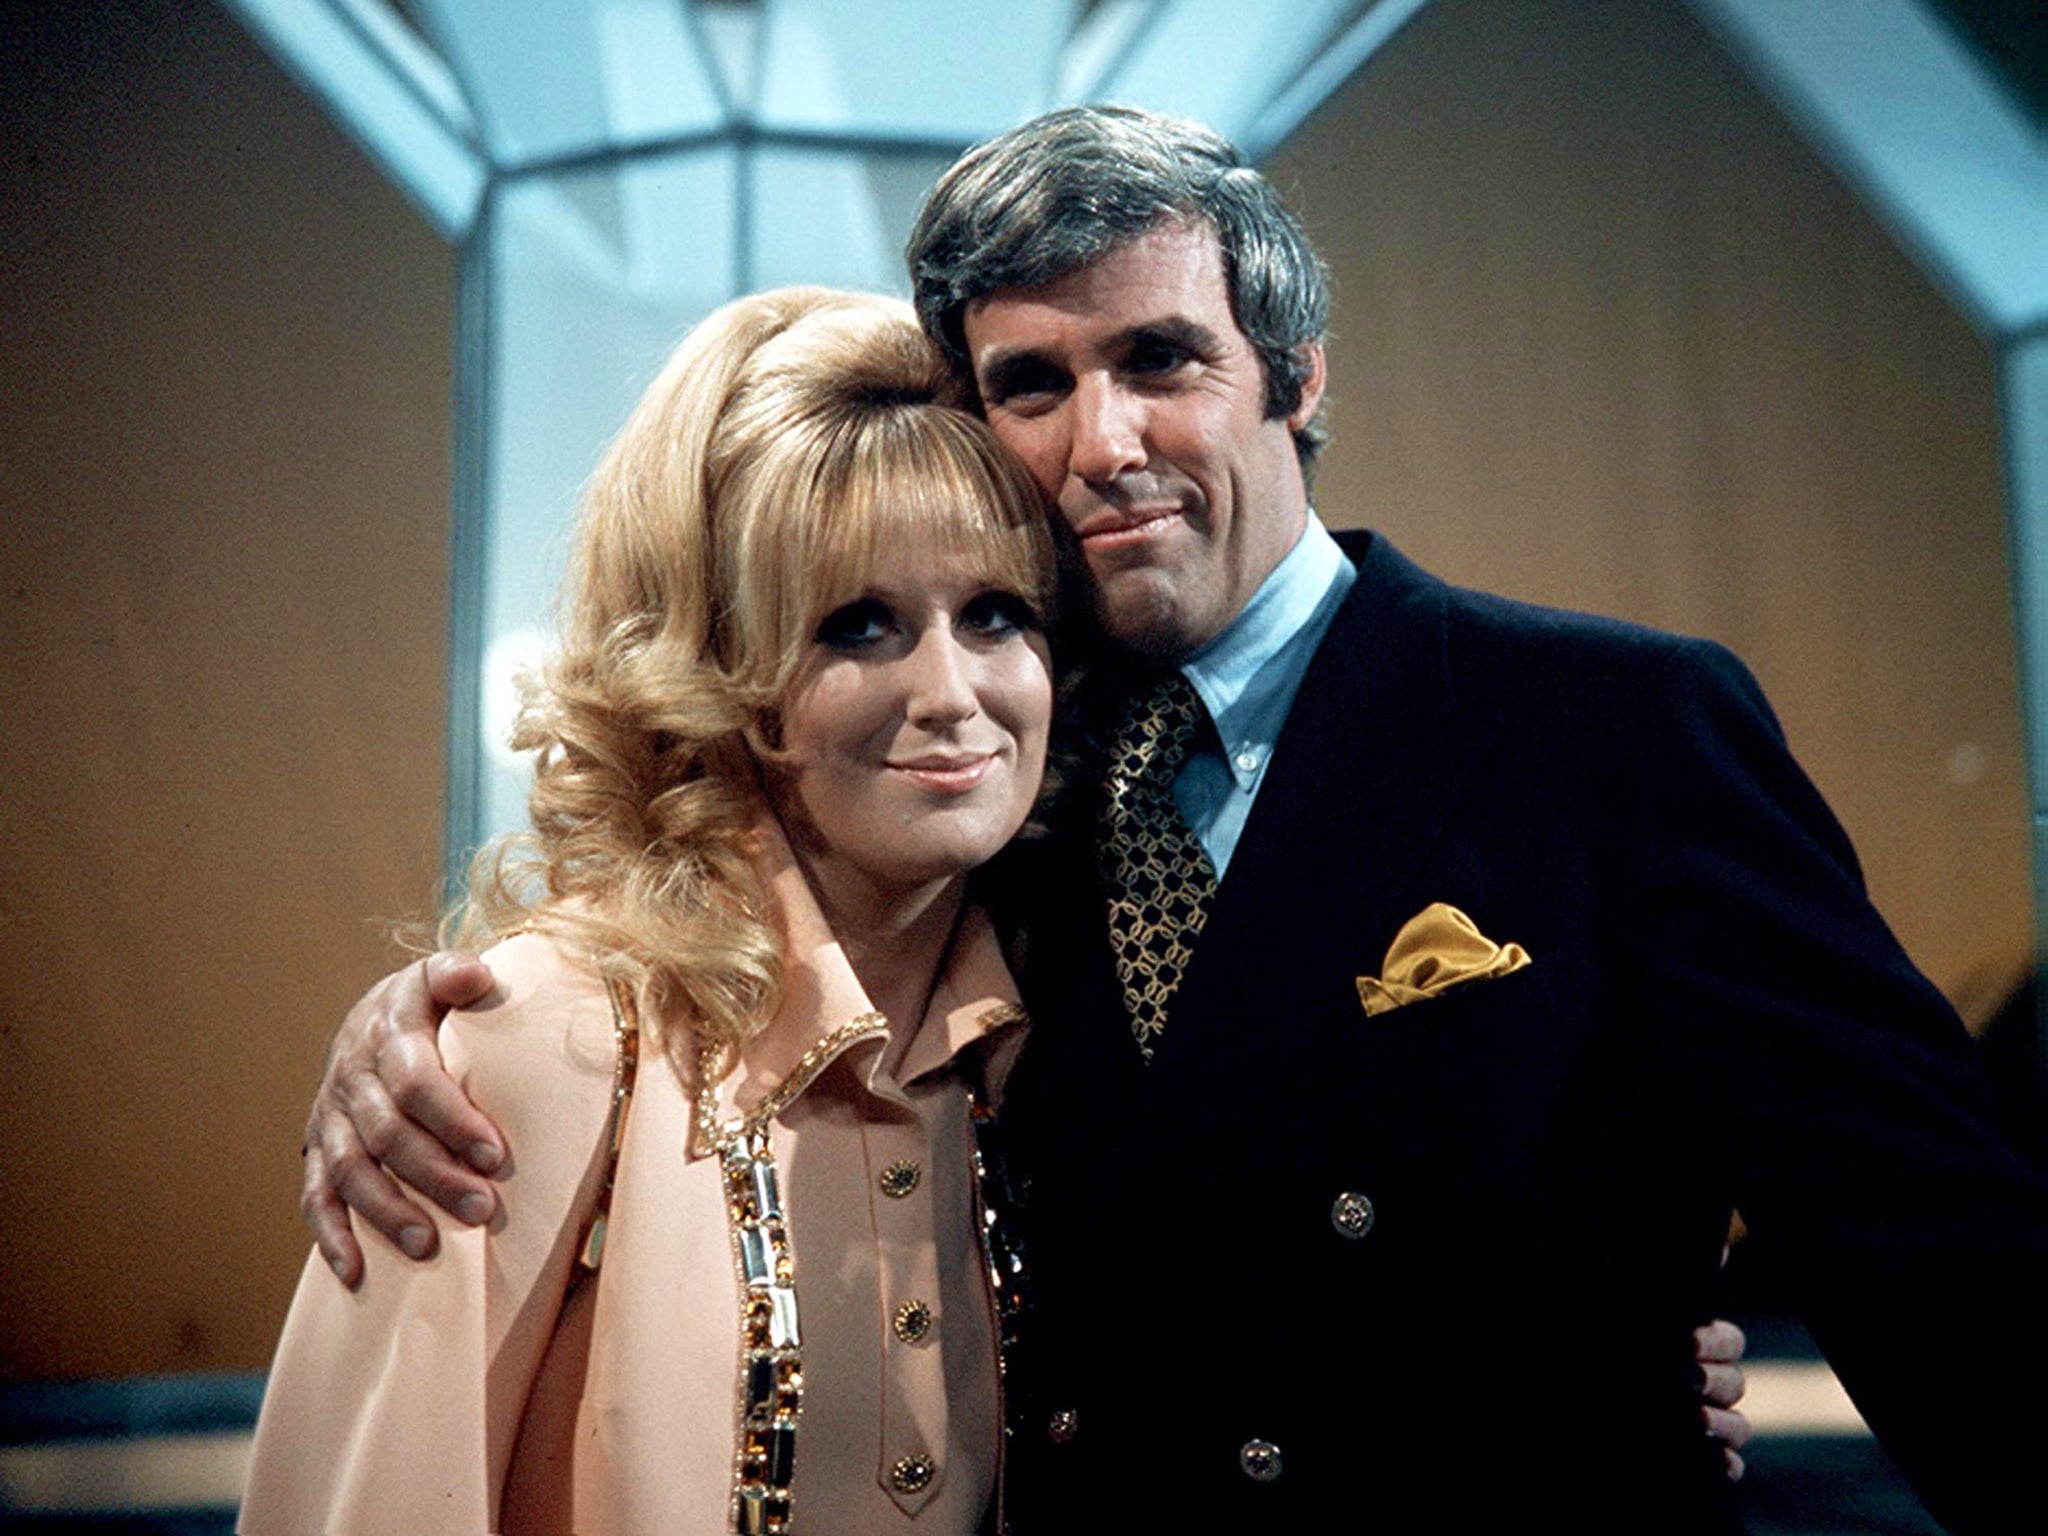 Burt Bacharach poses with Dusty Springfield in 1970